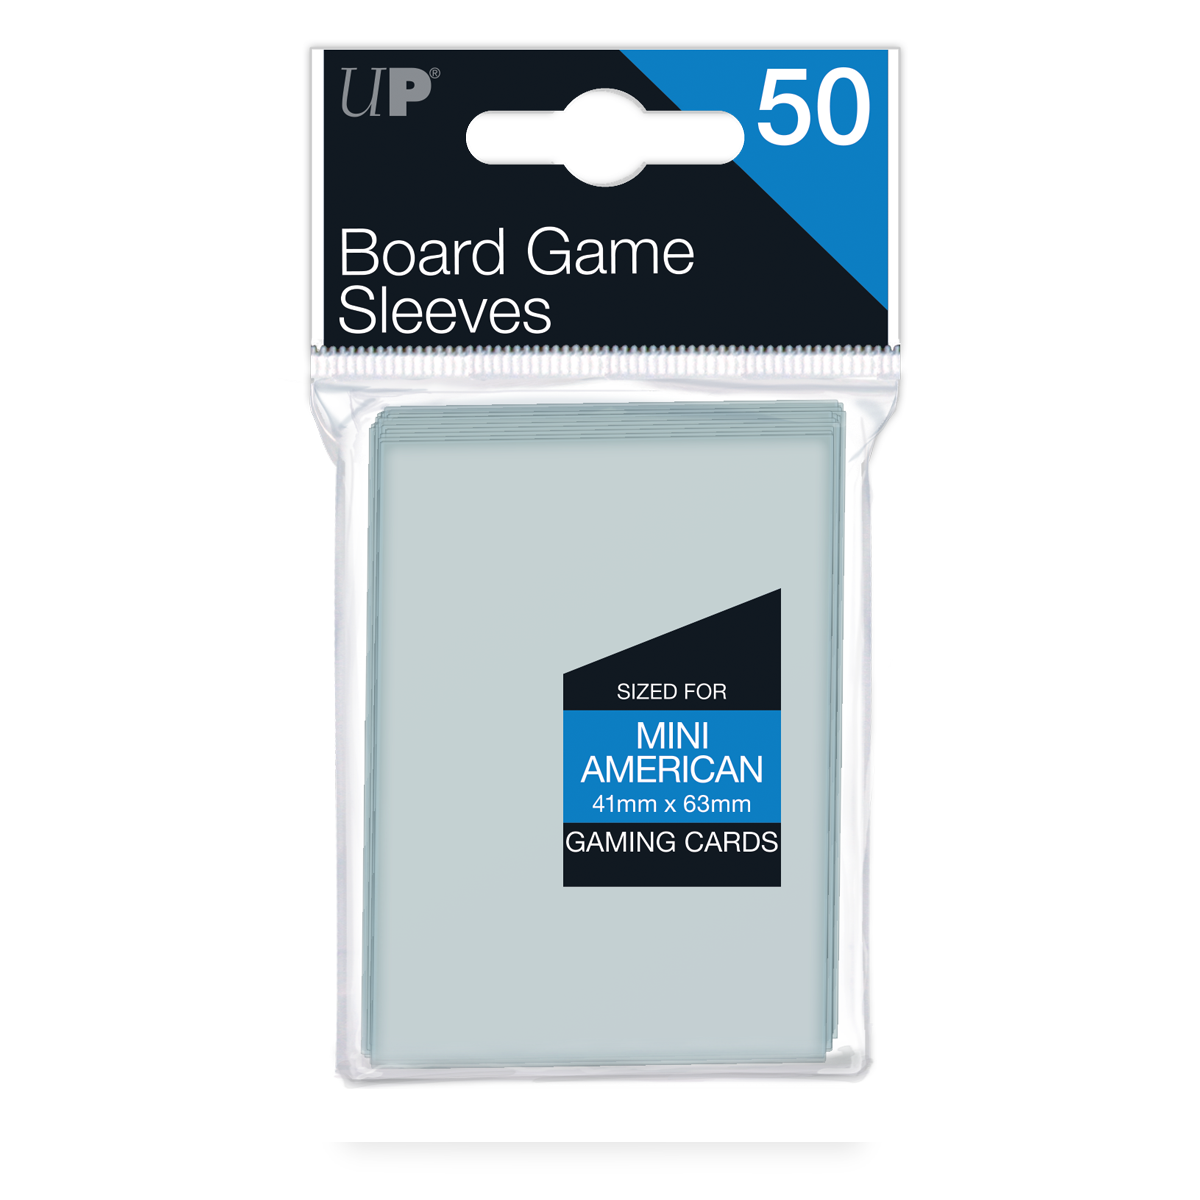 Mini American Board Game Sleeves (50ct) for 41mm x 63mm Cards | Ultra PRO International